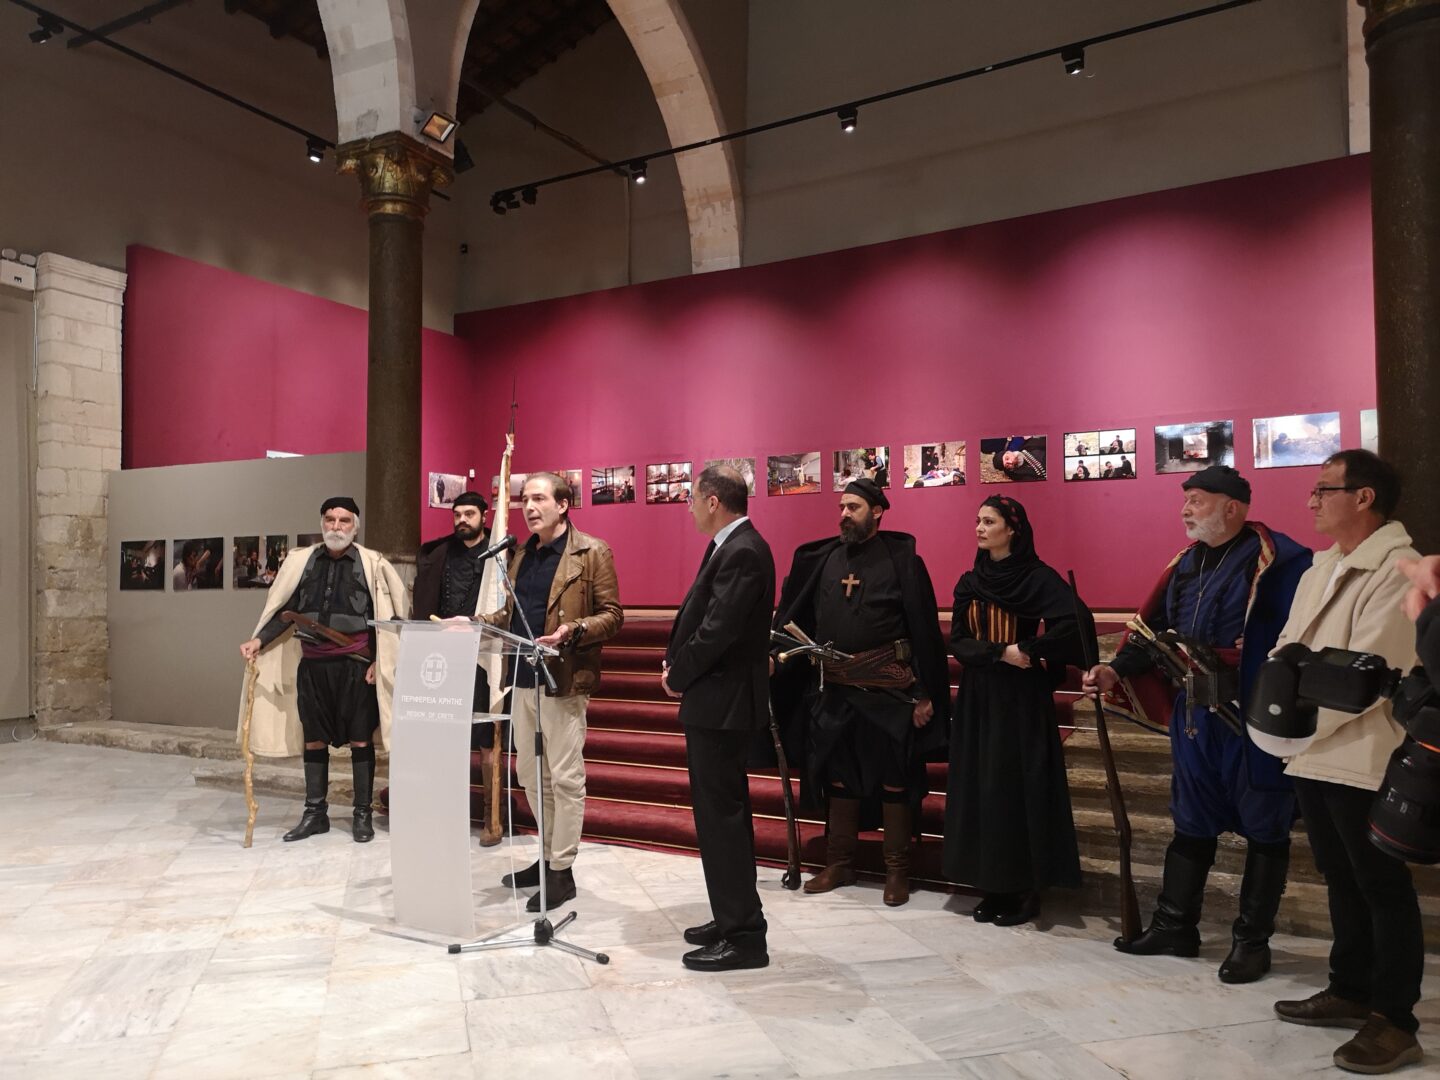 The Opening Ceremony of my photographic Exhibition!